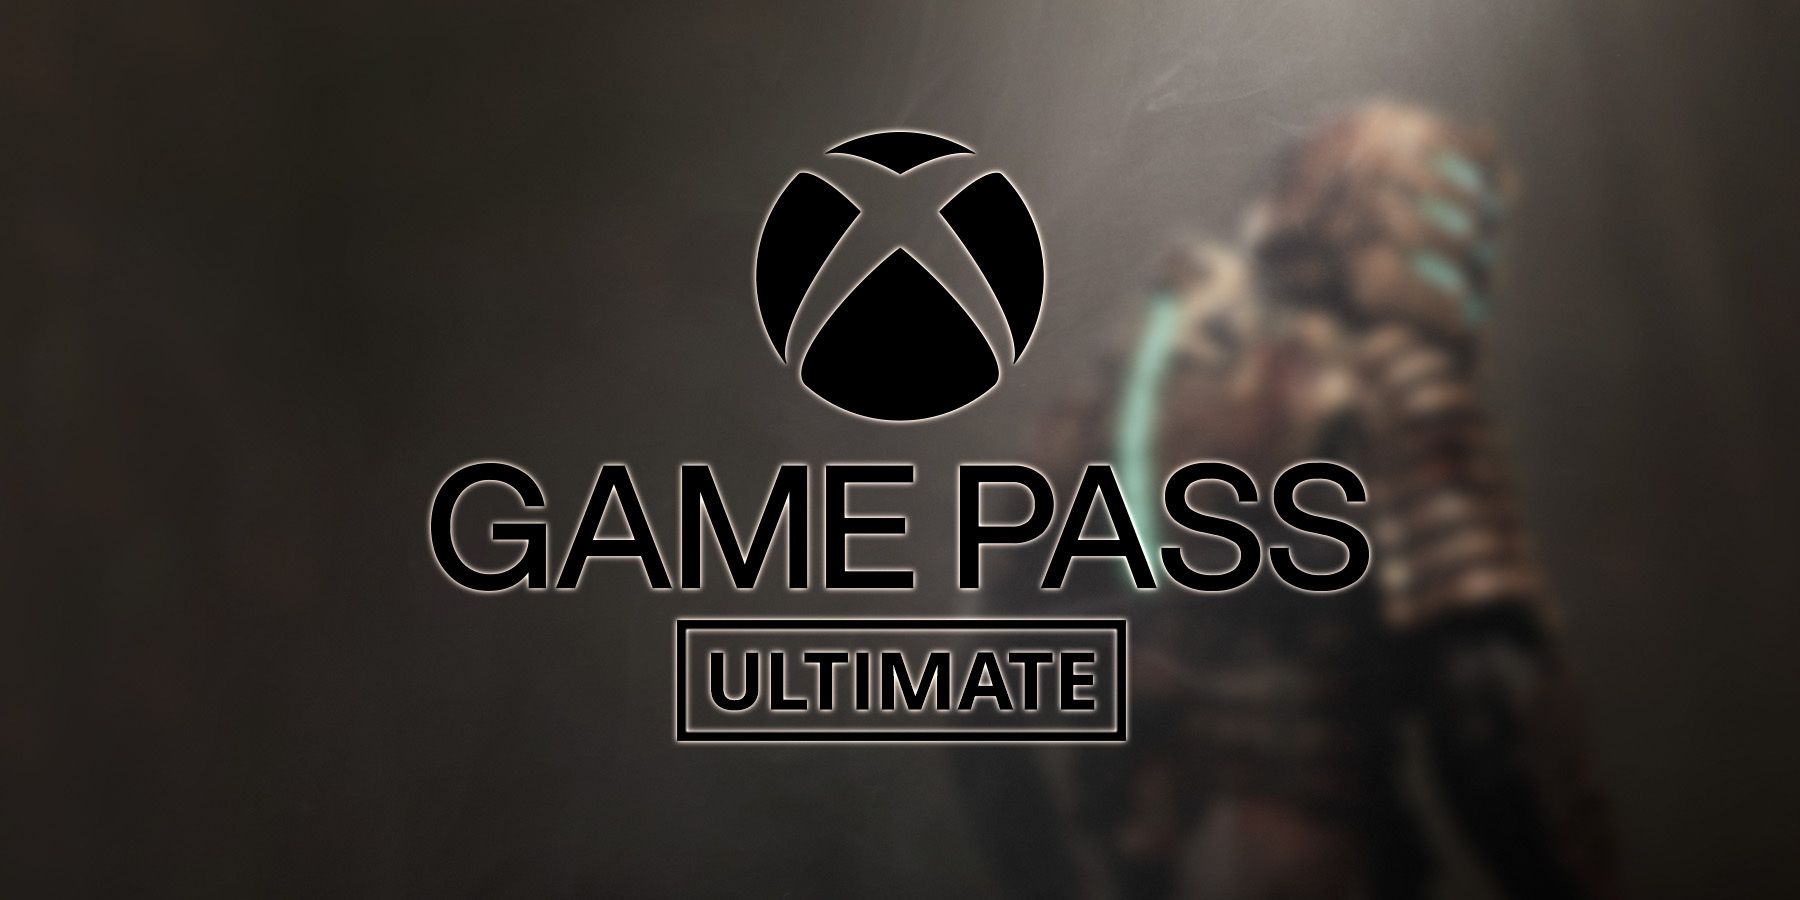 EA Play is coming to Xbox Game Pass on November 10